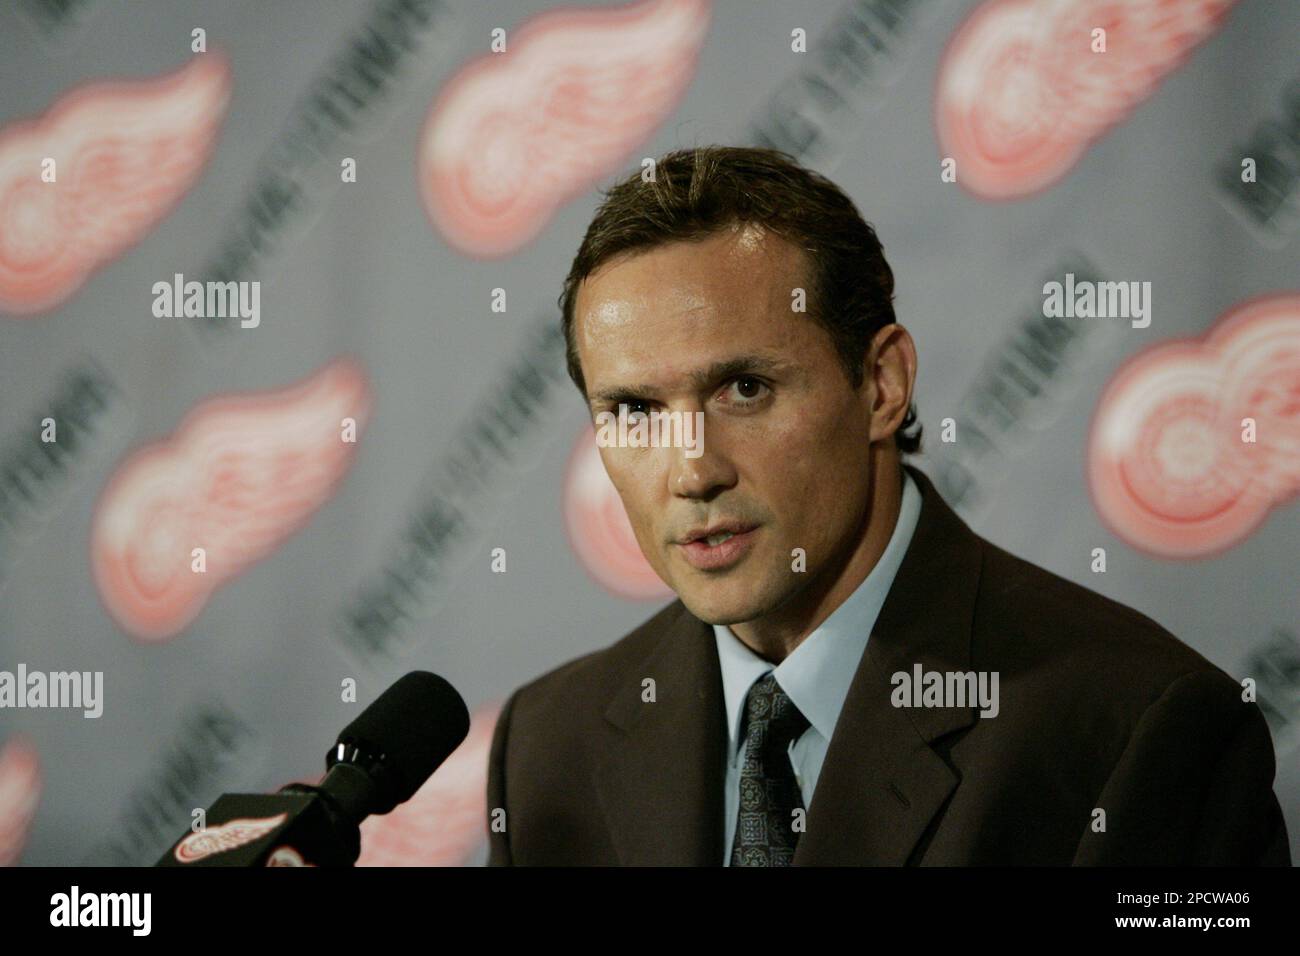 On eve of Hall of Fame induction, former Red Wings captain Steve Yzerman  looks back 